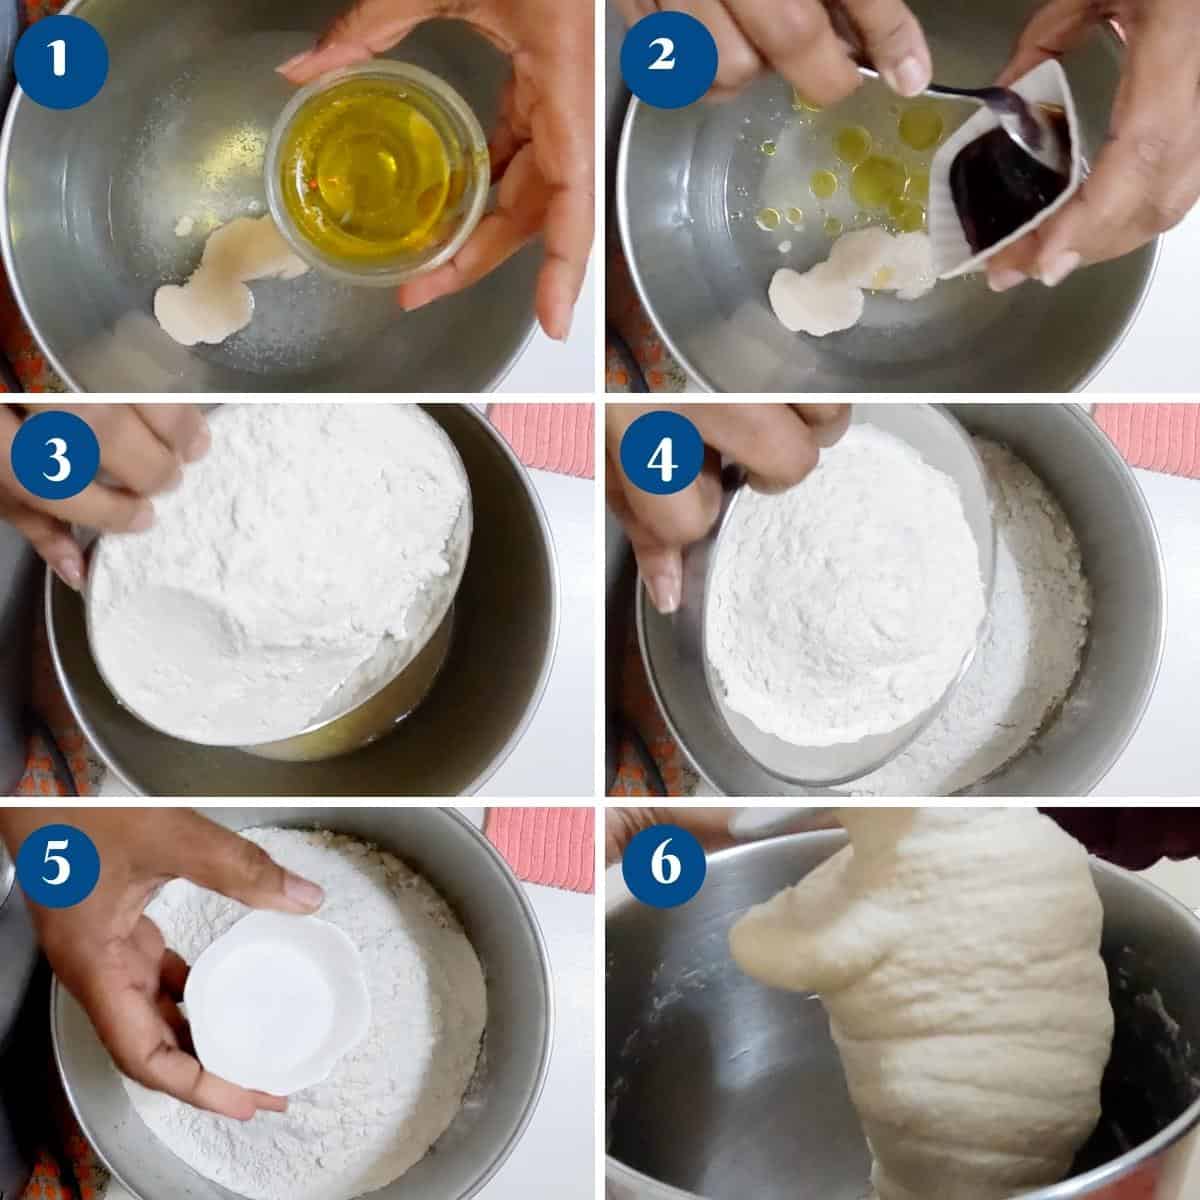 Progress pictures how to make the bagel dough.